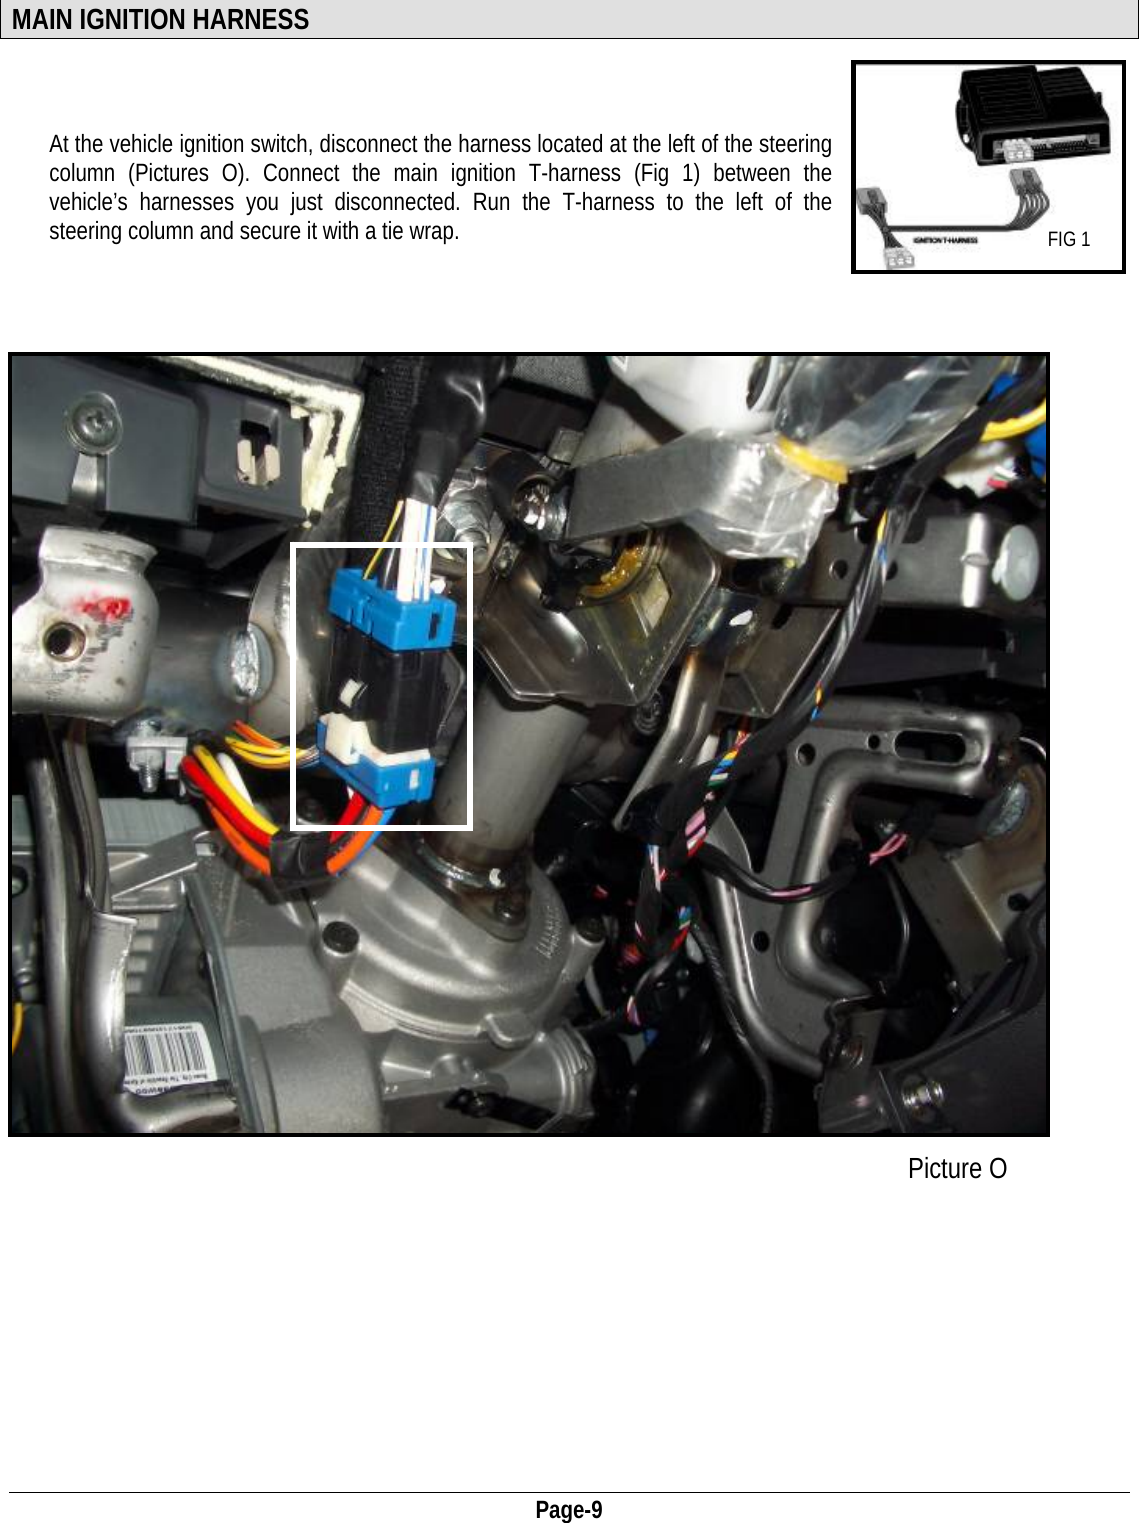  Page-9 MAIN IGNITION HARNESS    At the vehicle ignition switch, disconnect the harness located at the left of the steering column (Pictures O). Connect the main ignition T-harness (Fig 1) between the vehicle’s harnesses you just disconnected. Run the T-harness to the left of the steering column and secure it with a tie wrap.  FIG 1                                Picture O                               